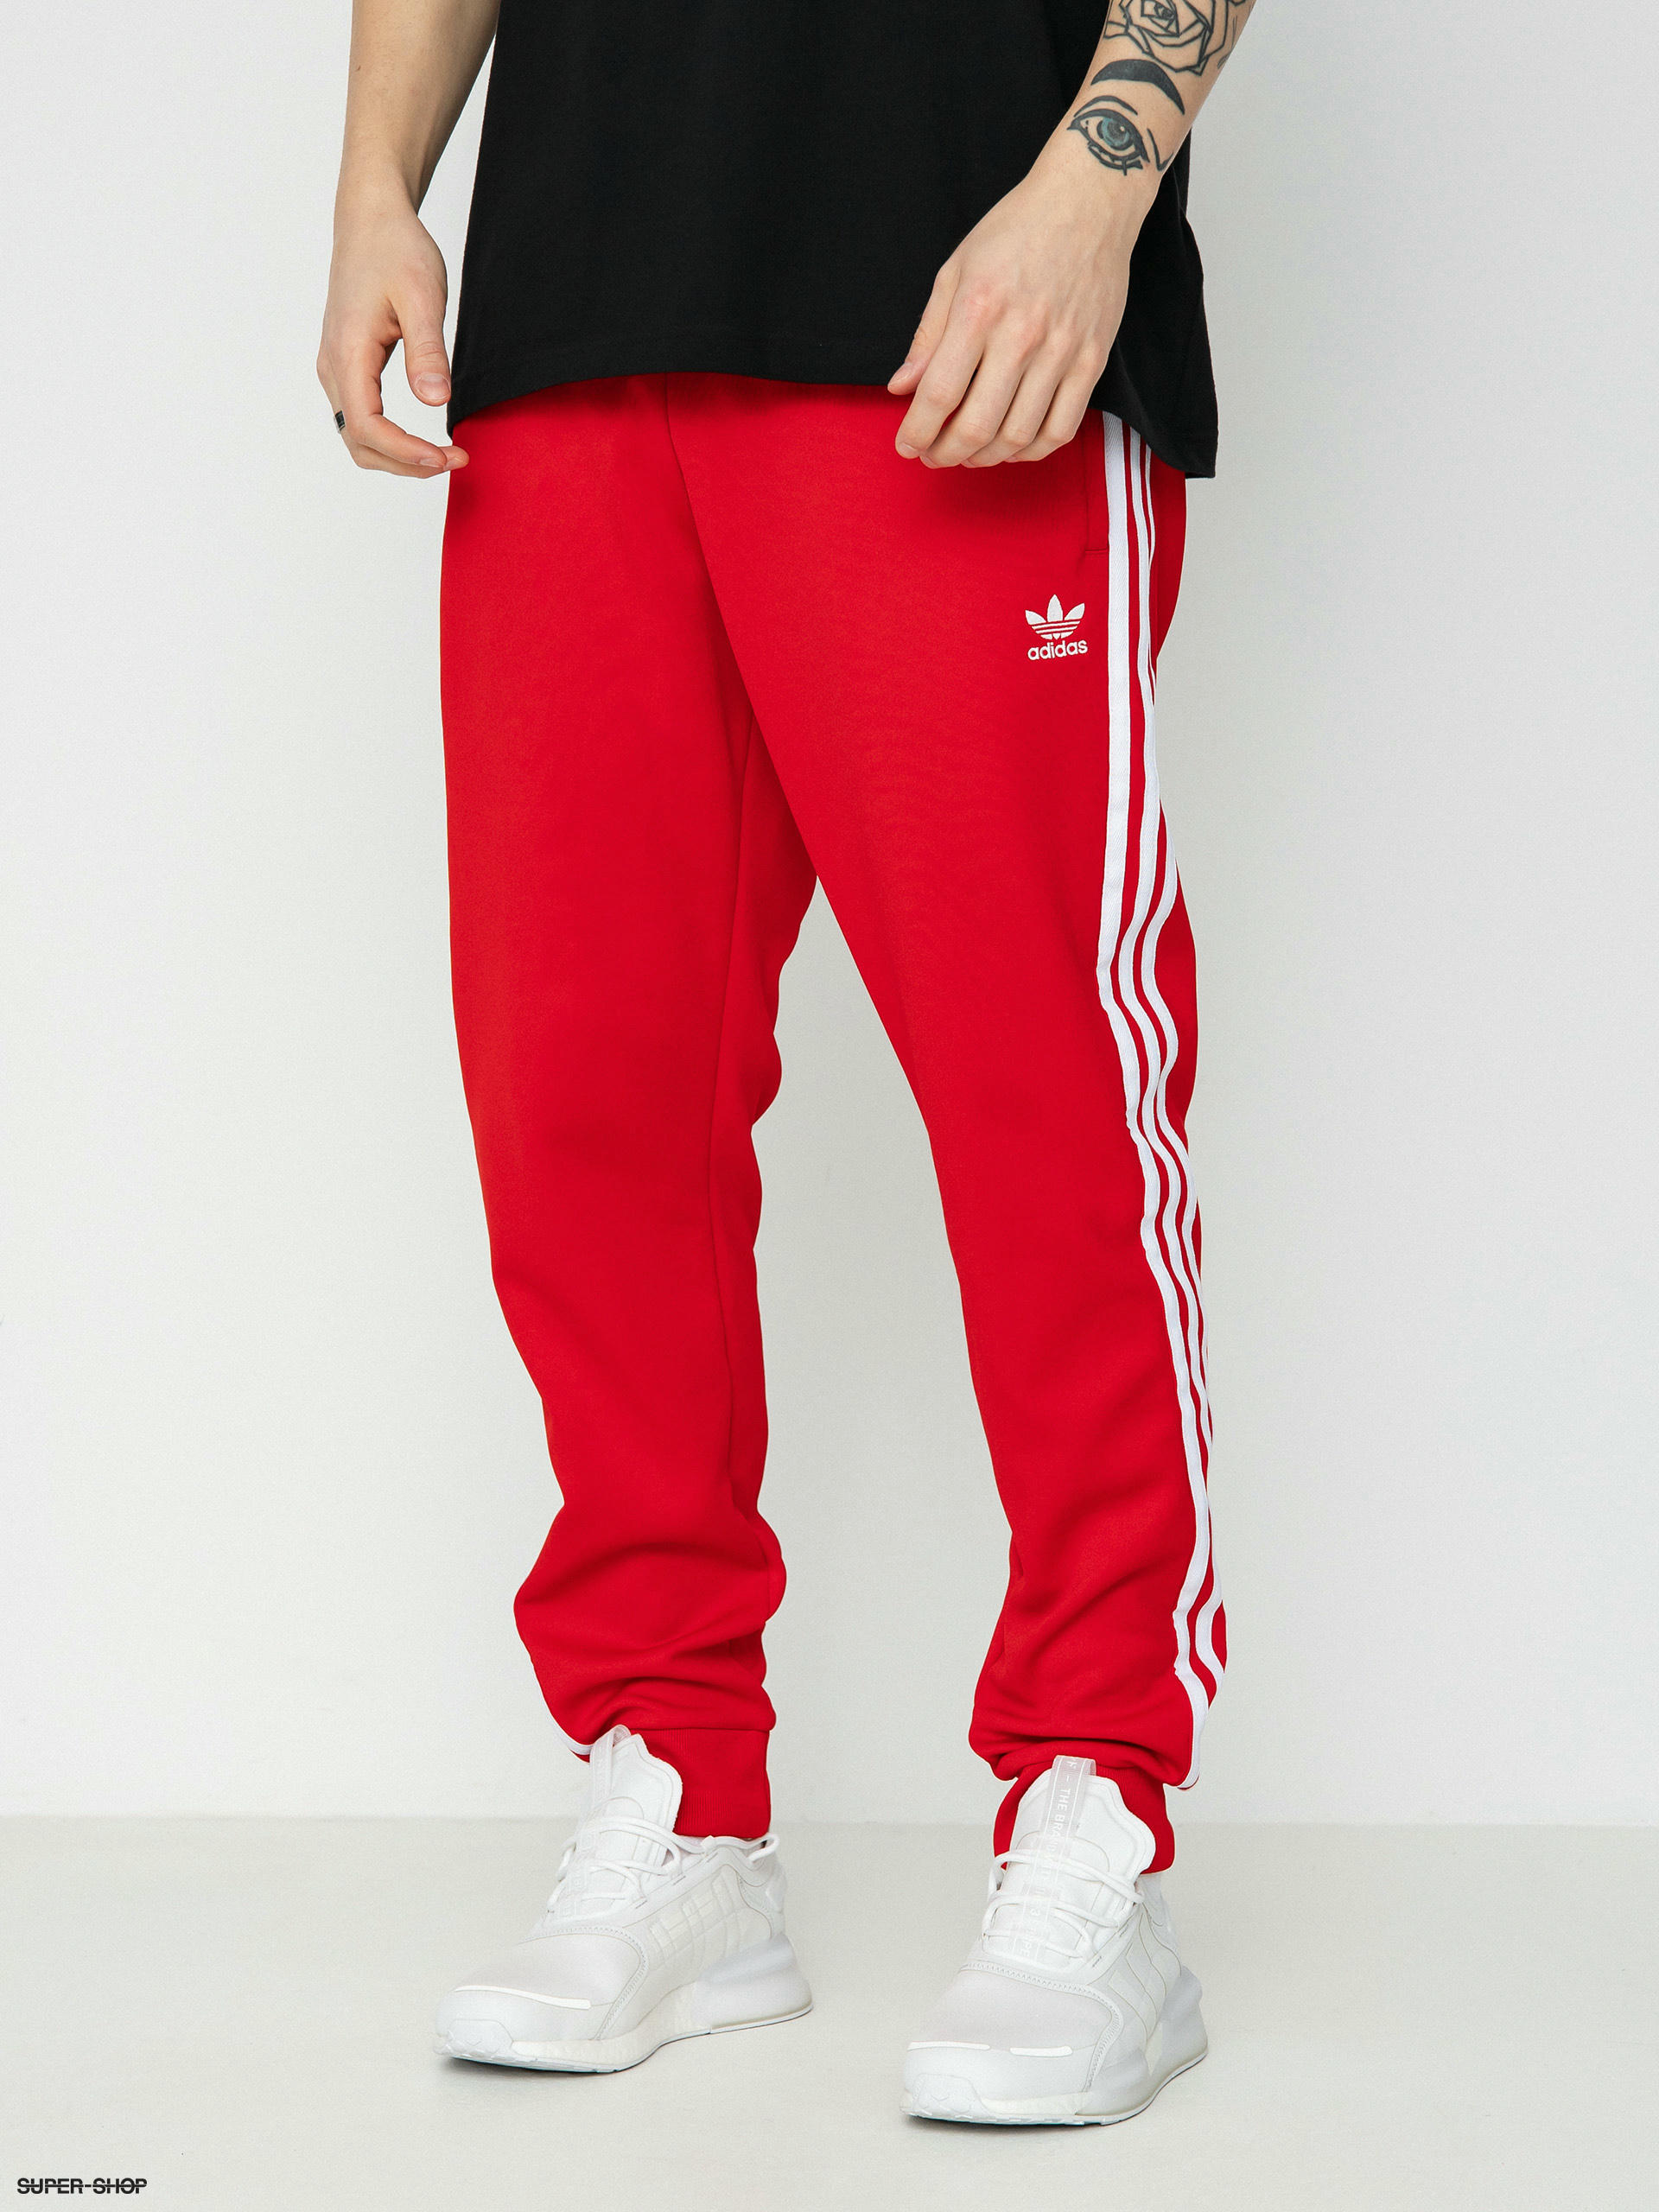 adidas Plus Size Superstar Full Length Track Pants - Macy's